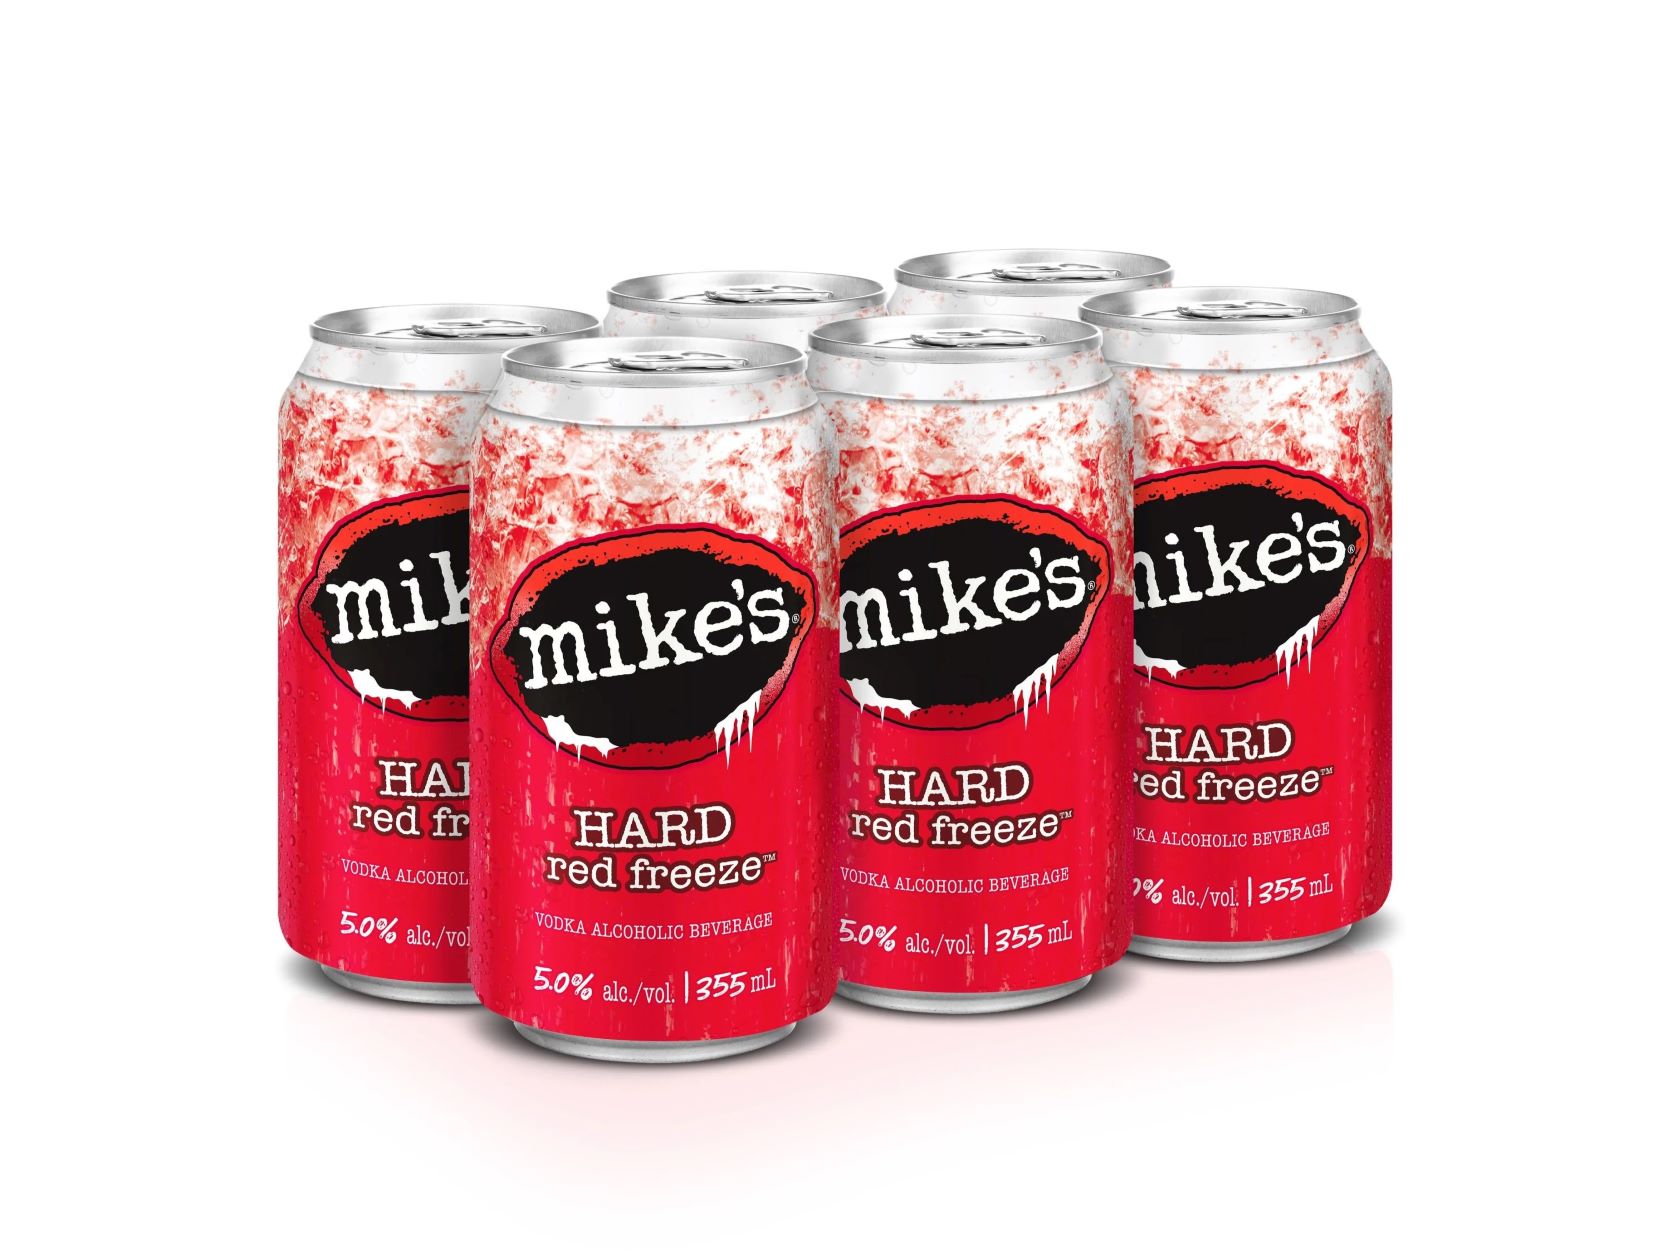 10-mikes-hard-red-freeze-nutrition-facts